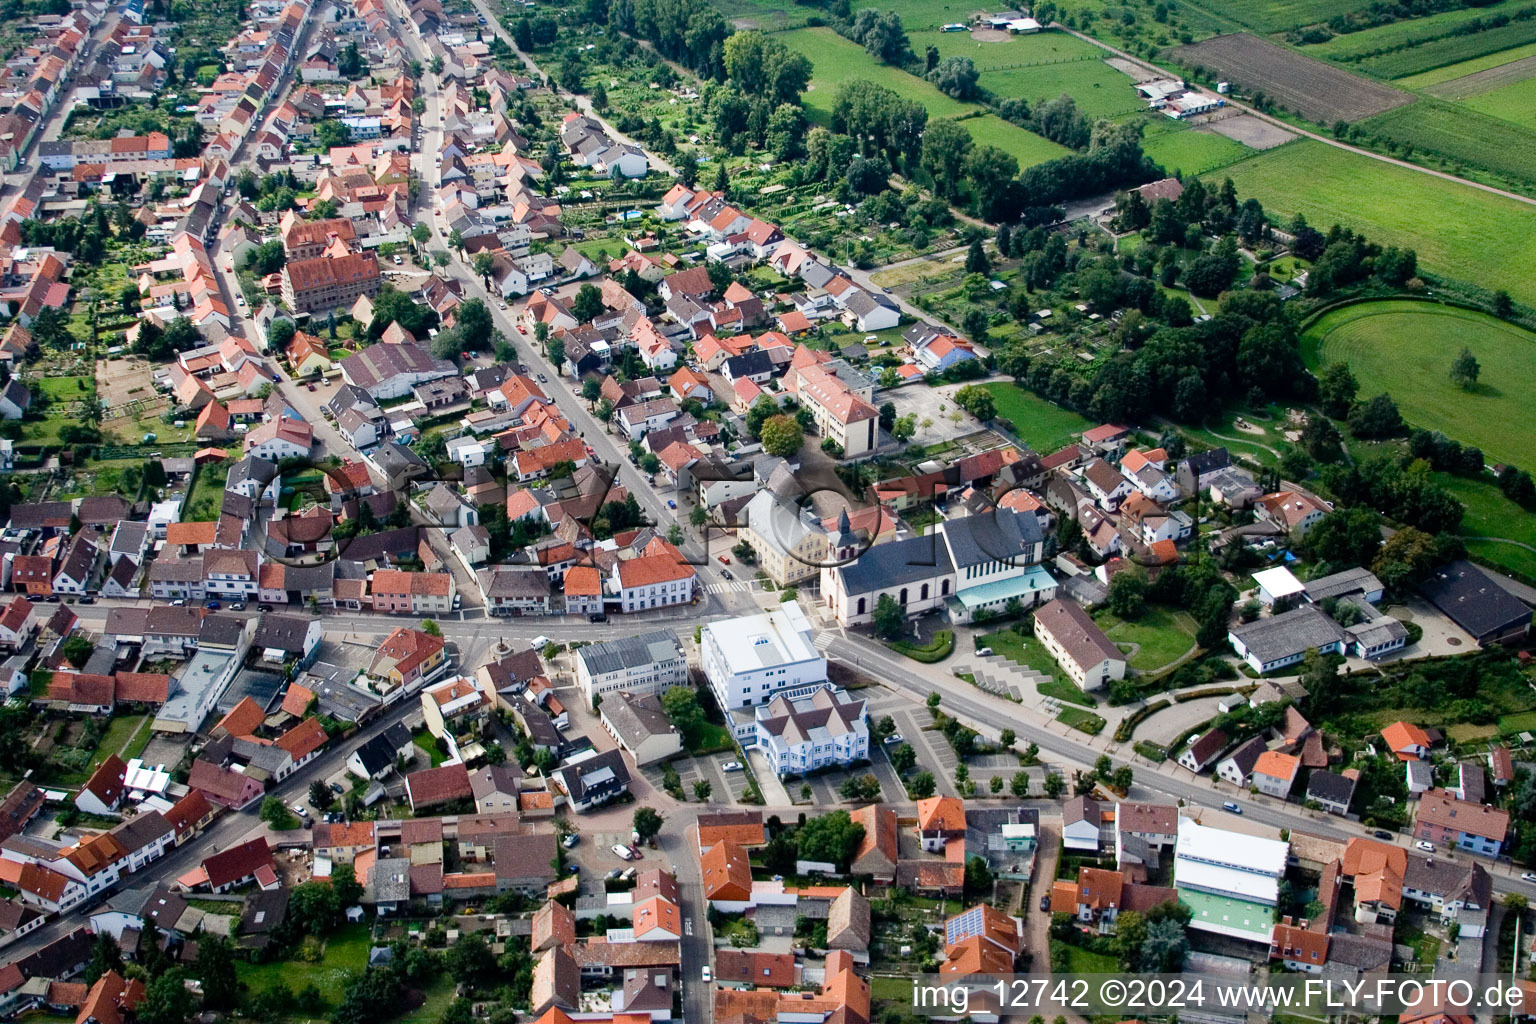 Aerial view of Church building in of katholischen Kirche Old Town- center of downtown in the district Oberhausen in Oberhausen-Rheinhausen in the state Baden-Wurttemberg, Germany